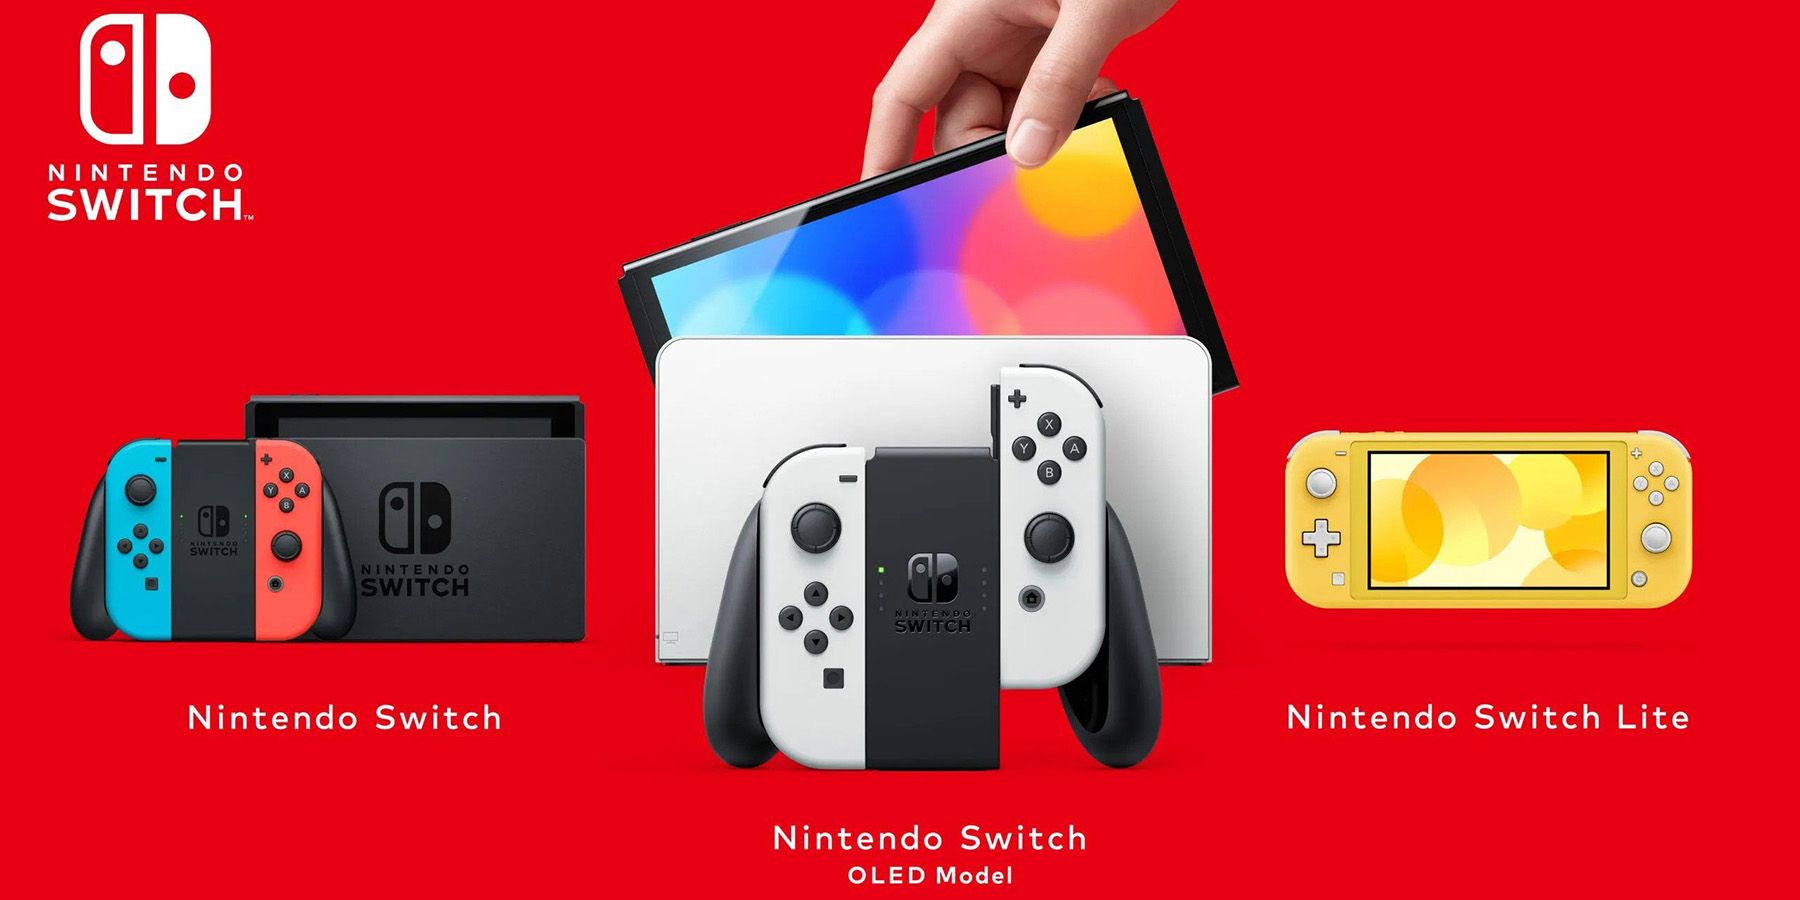 Buying a Used Nintendo Switch Comes With a Major Risk